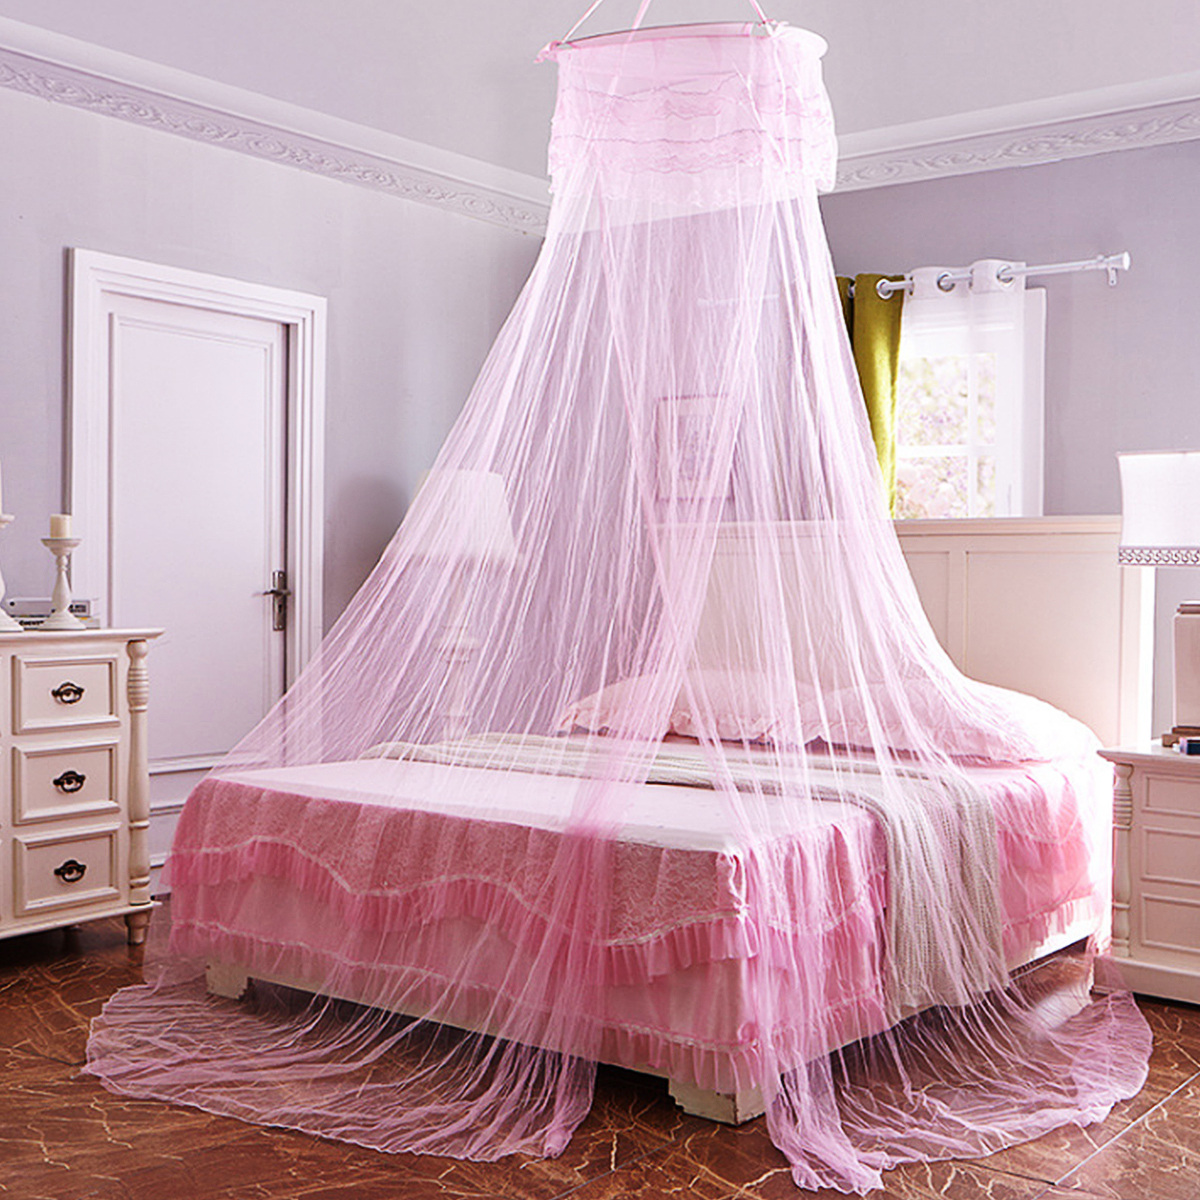 Anti-Mosquito-Round-Ceiling-Mosquito-Net-Dense-And-High-Polyester-Mesh-No-Installation-Mosquito-Net-1866033-9